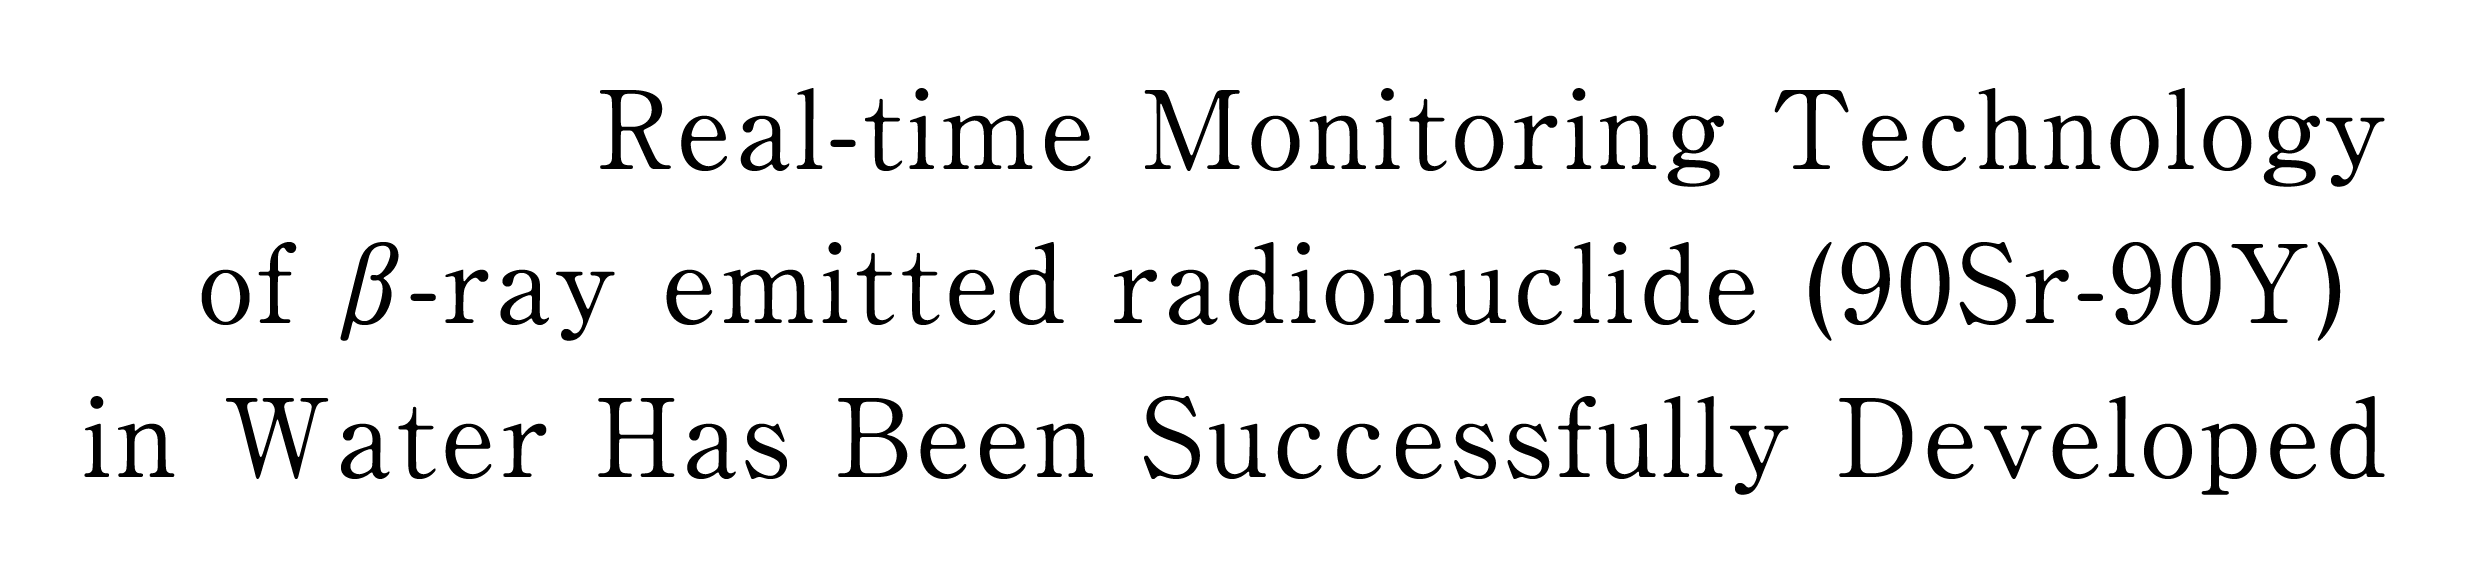 Real-time Monitoring Technology of β-ray emitted radionuclide (90Sr-90Y) in Water Has Been Successfully Developed